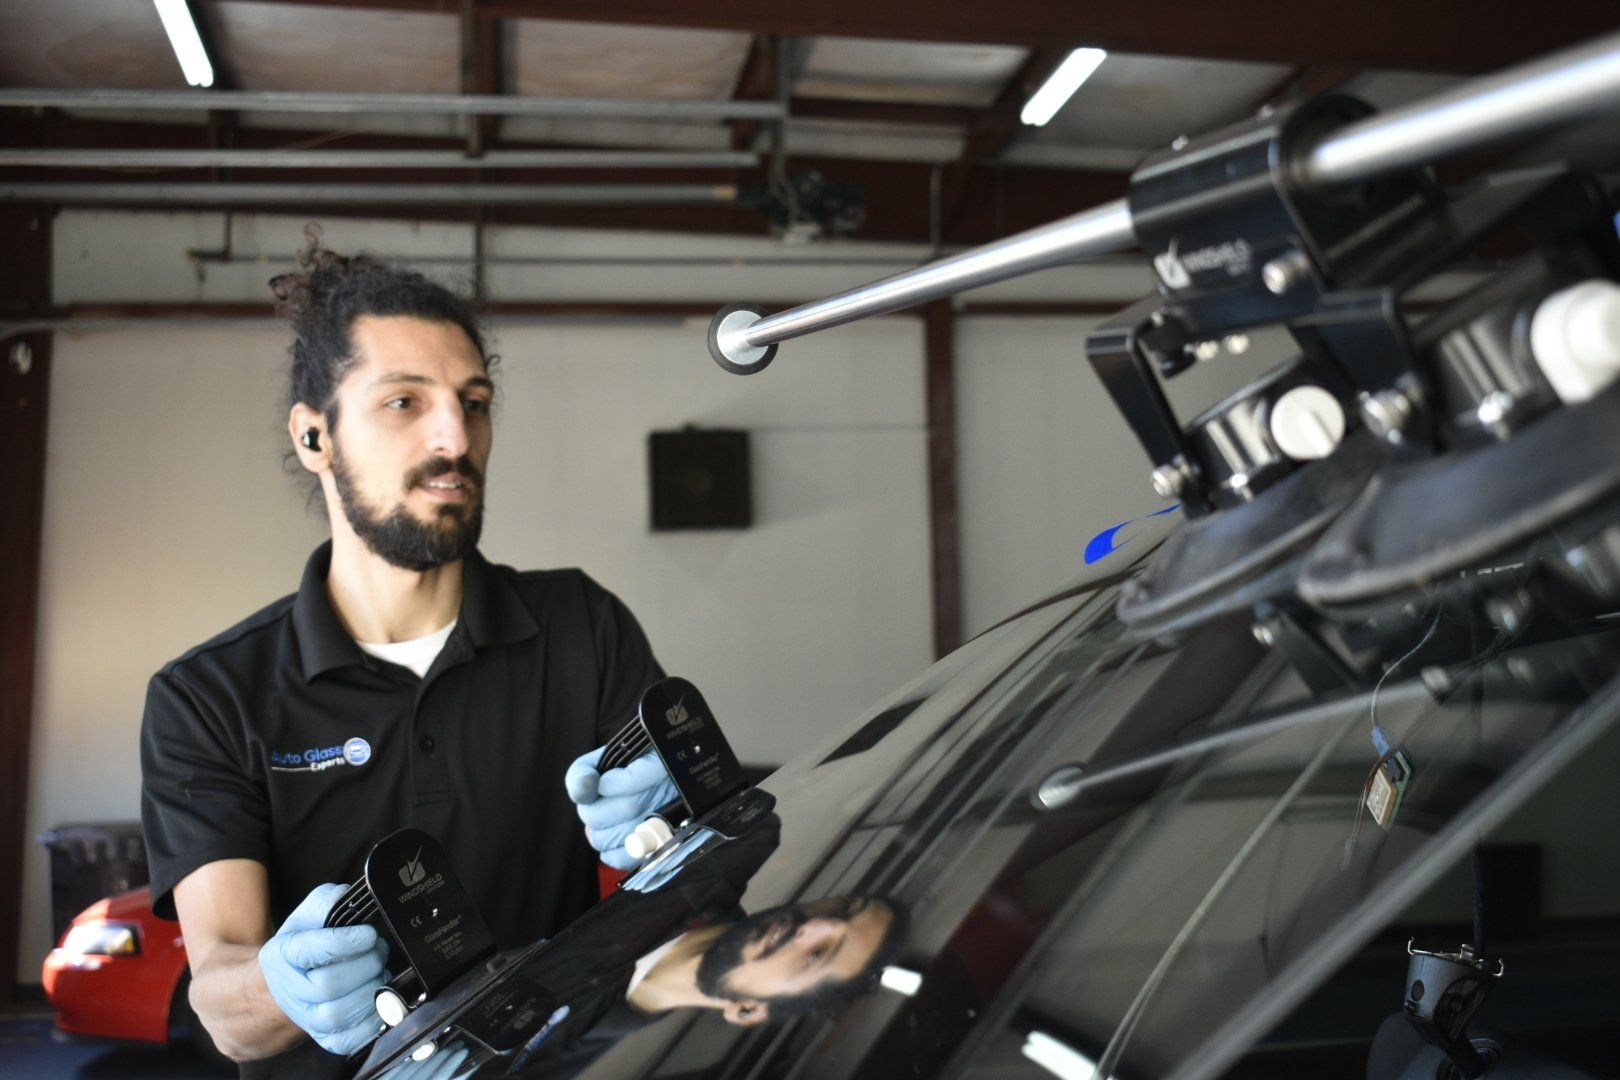 Man Replacing the Windshield – Windshield Replacement Services Charlotte NC